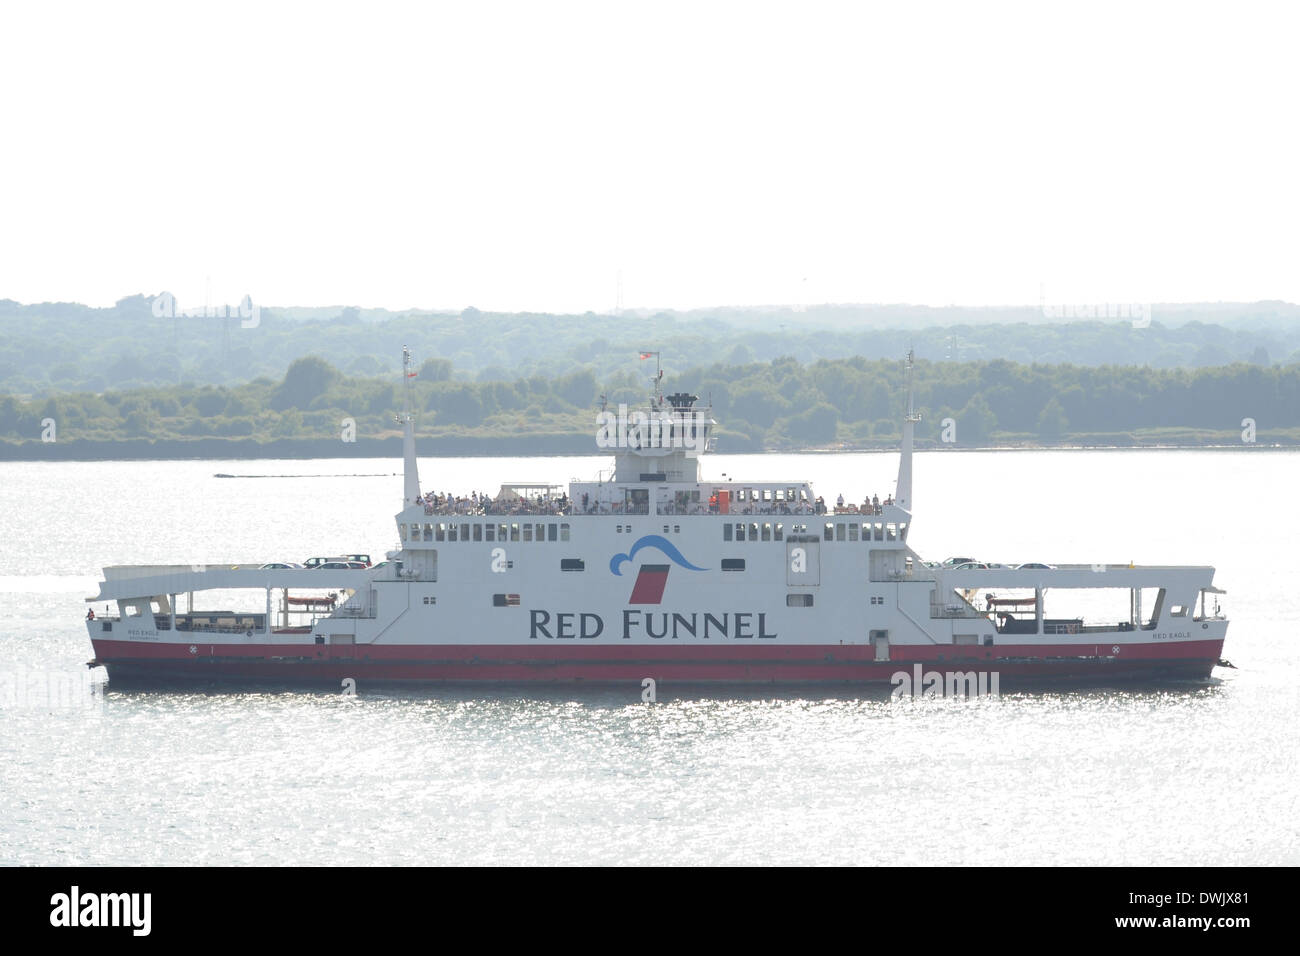 A red funnel ship. Stock Photo